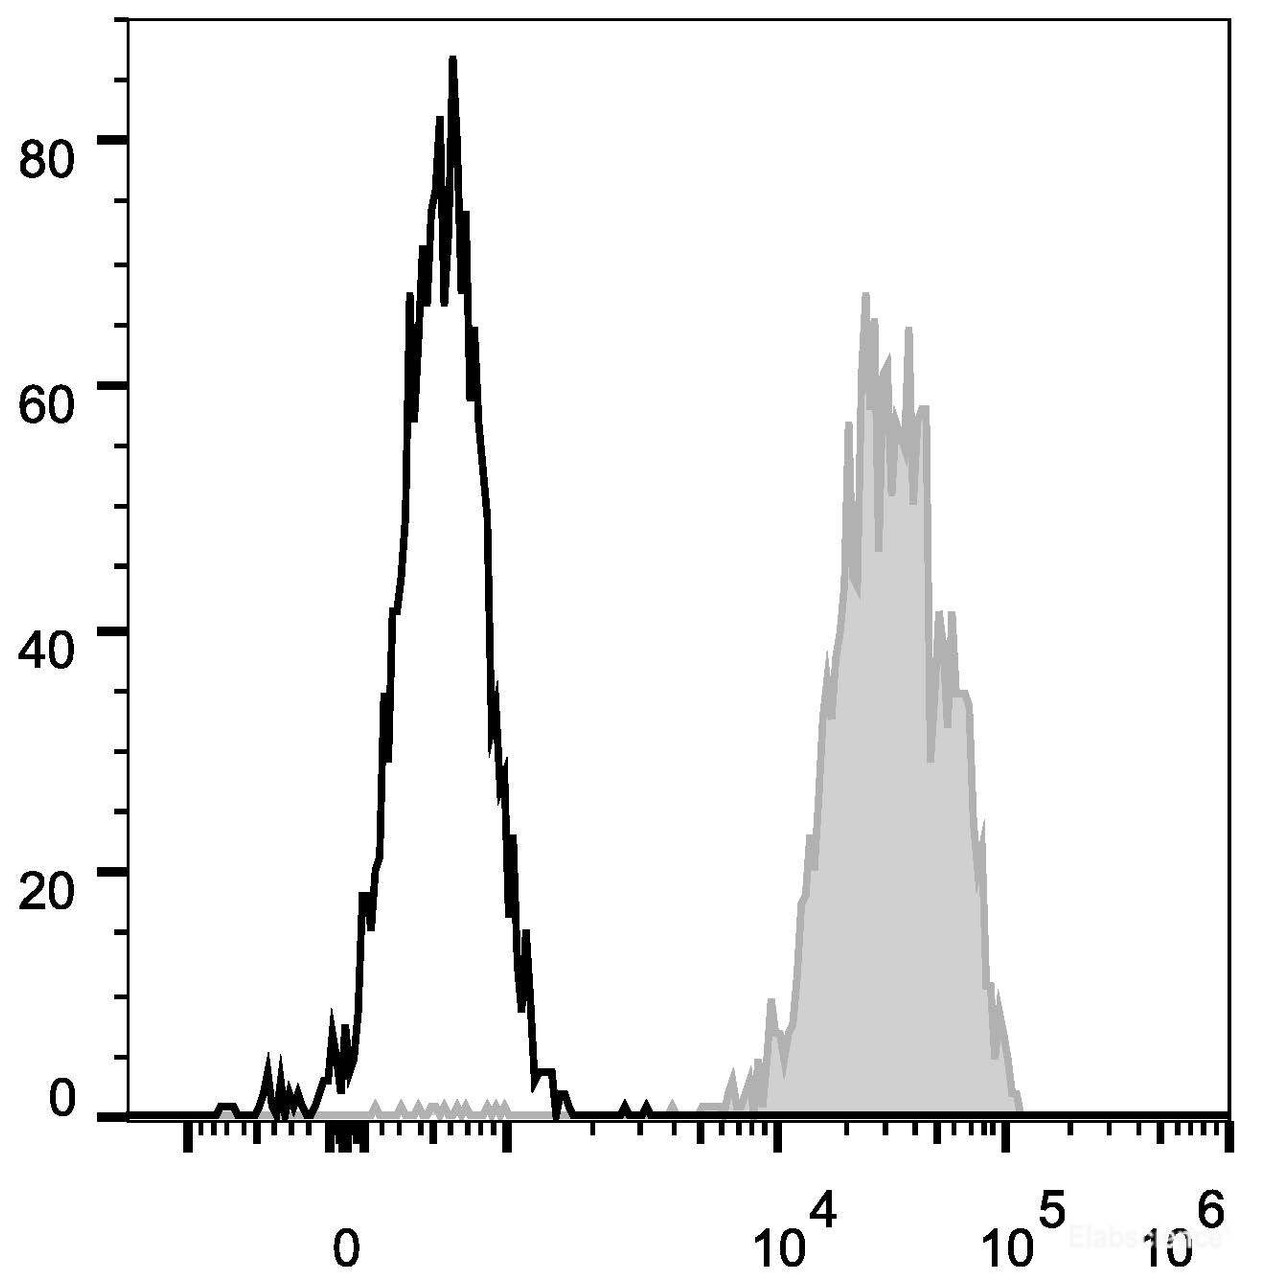 Human peripheral blood lymphocytes are stained with Anti-Human CD48 Monoclonal Antibody(FITC Conjugated)(filled gray histogram). Unstained lymphocytes (empty black histogram) are used as control.